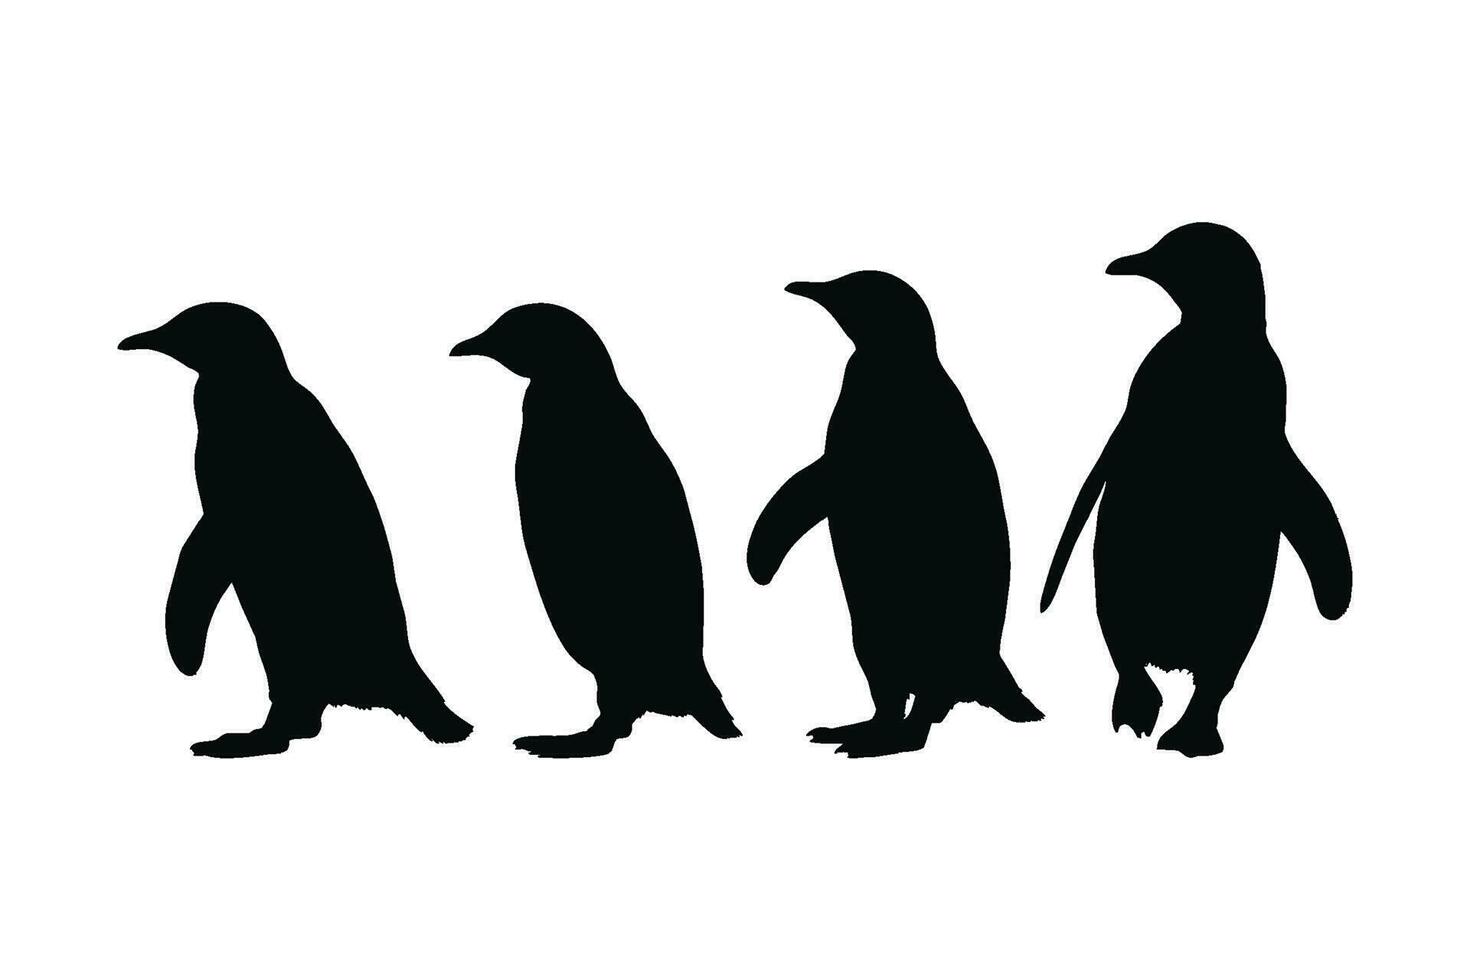 Penguin full body silhouette collection. Wild flightless bird silhouette bundle design. Herbivorous penguins standing silhouette set on a white background. Cute penguin standing in different positions vector